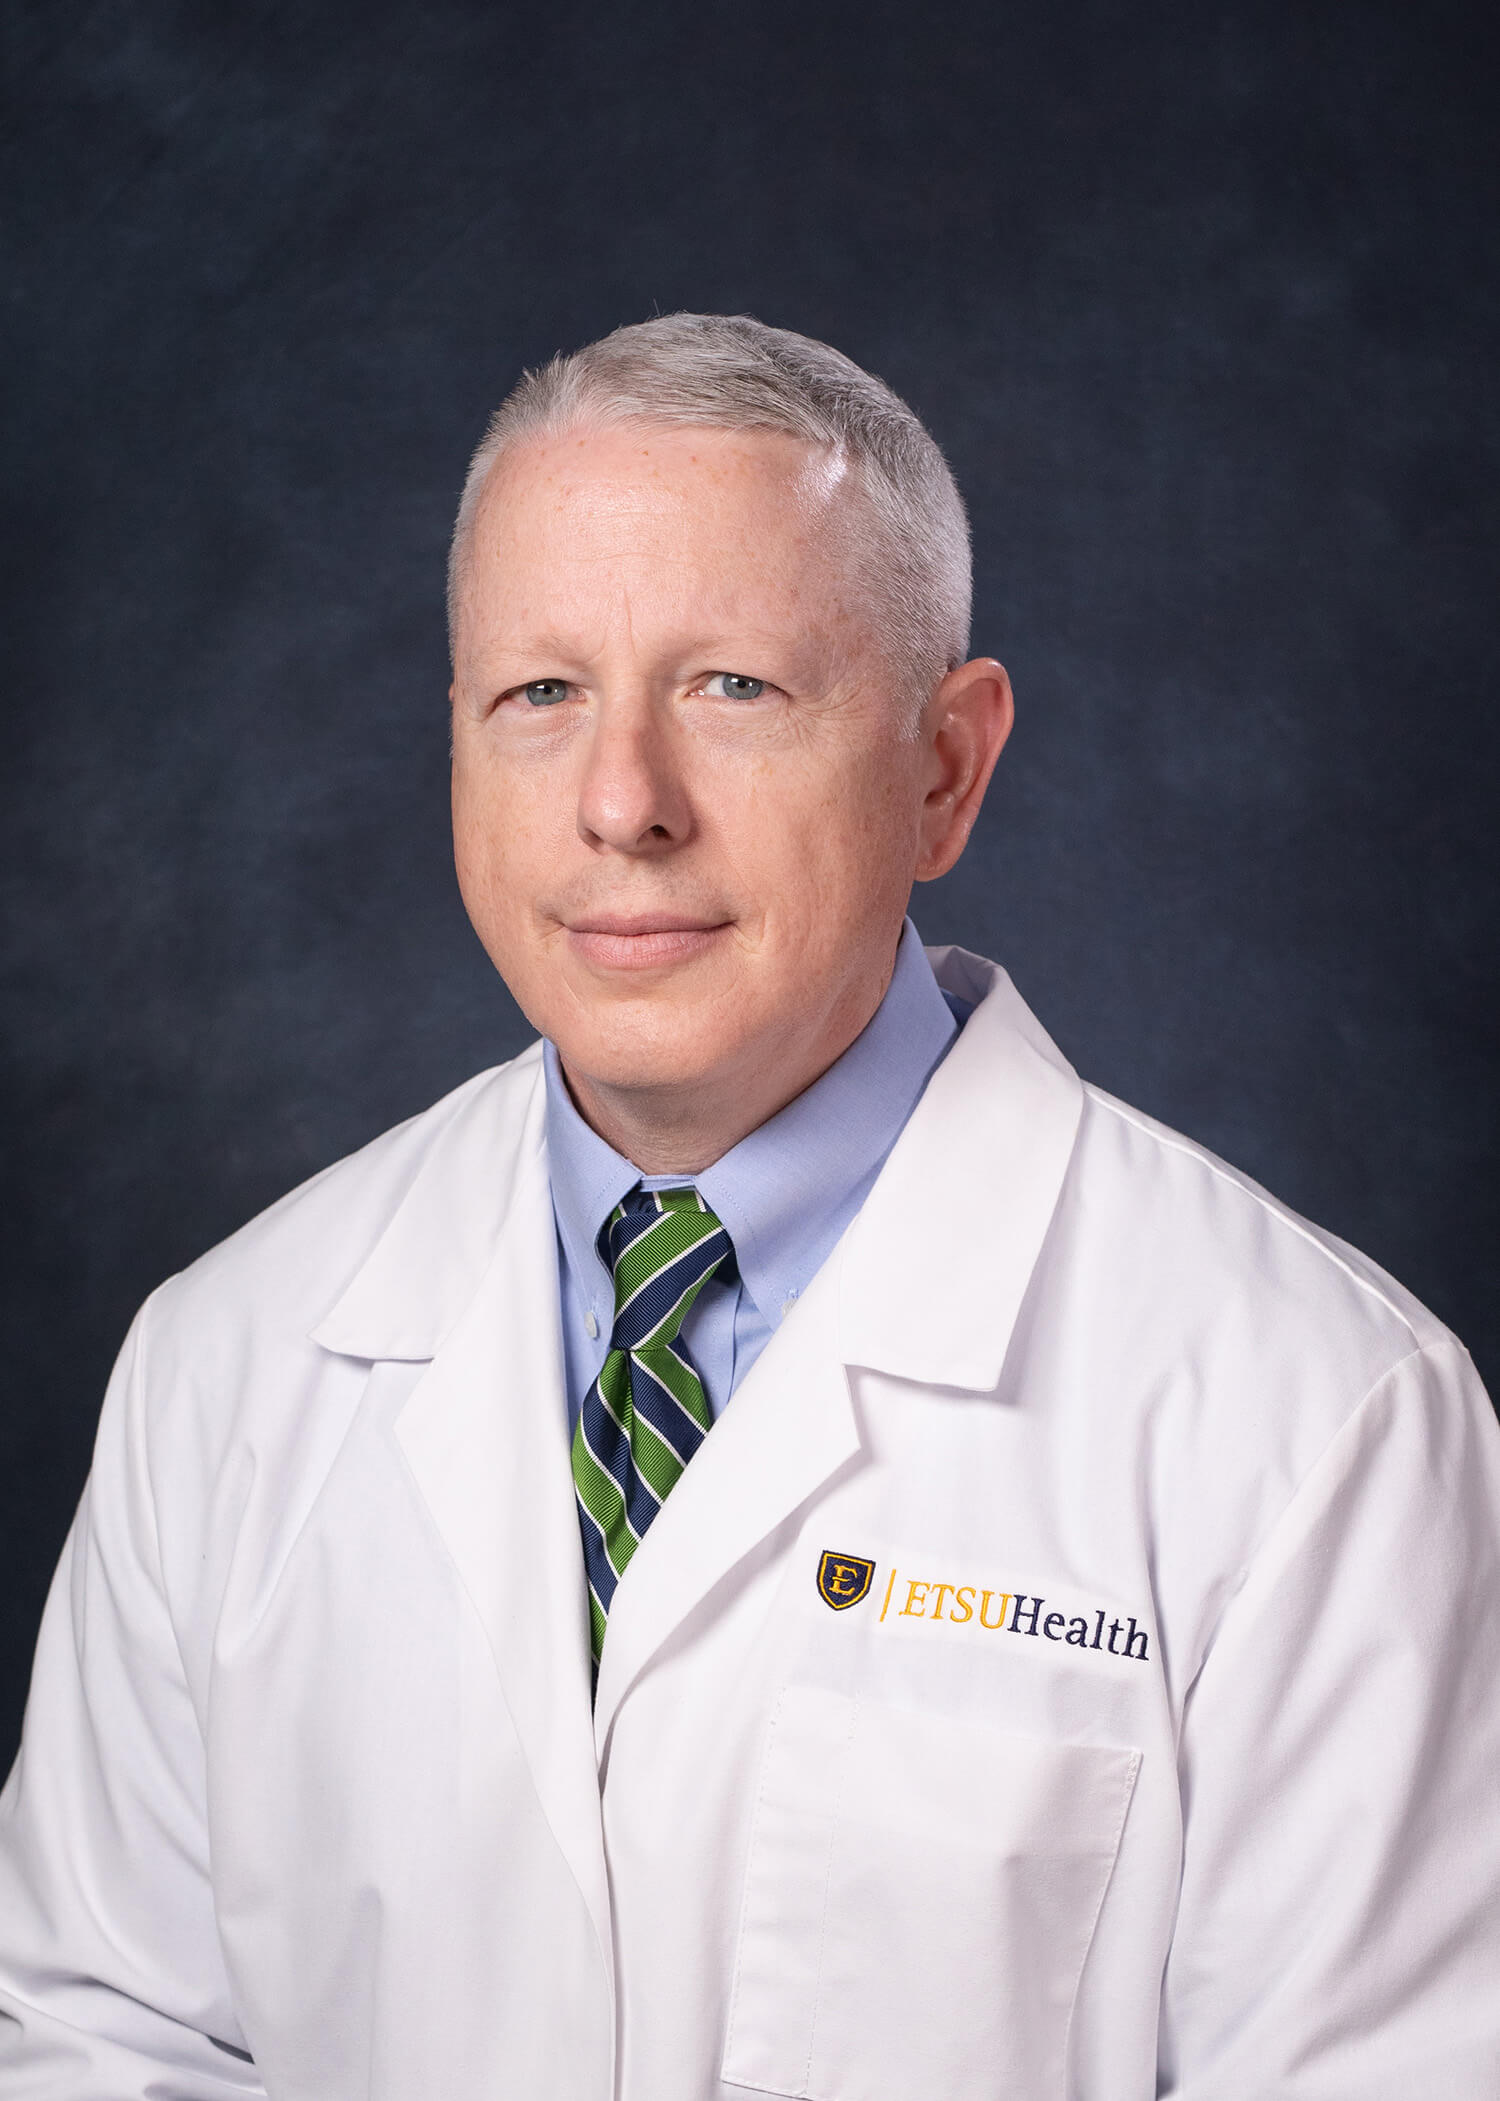 Photo of R. Keith Huffaker, M.D.